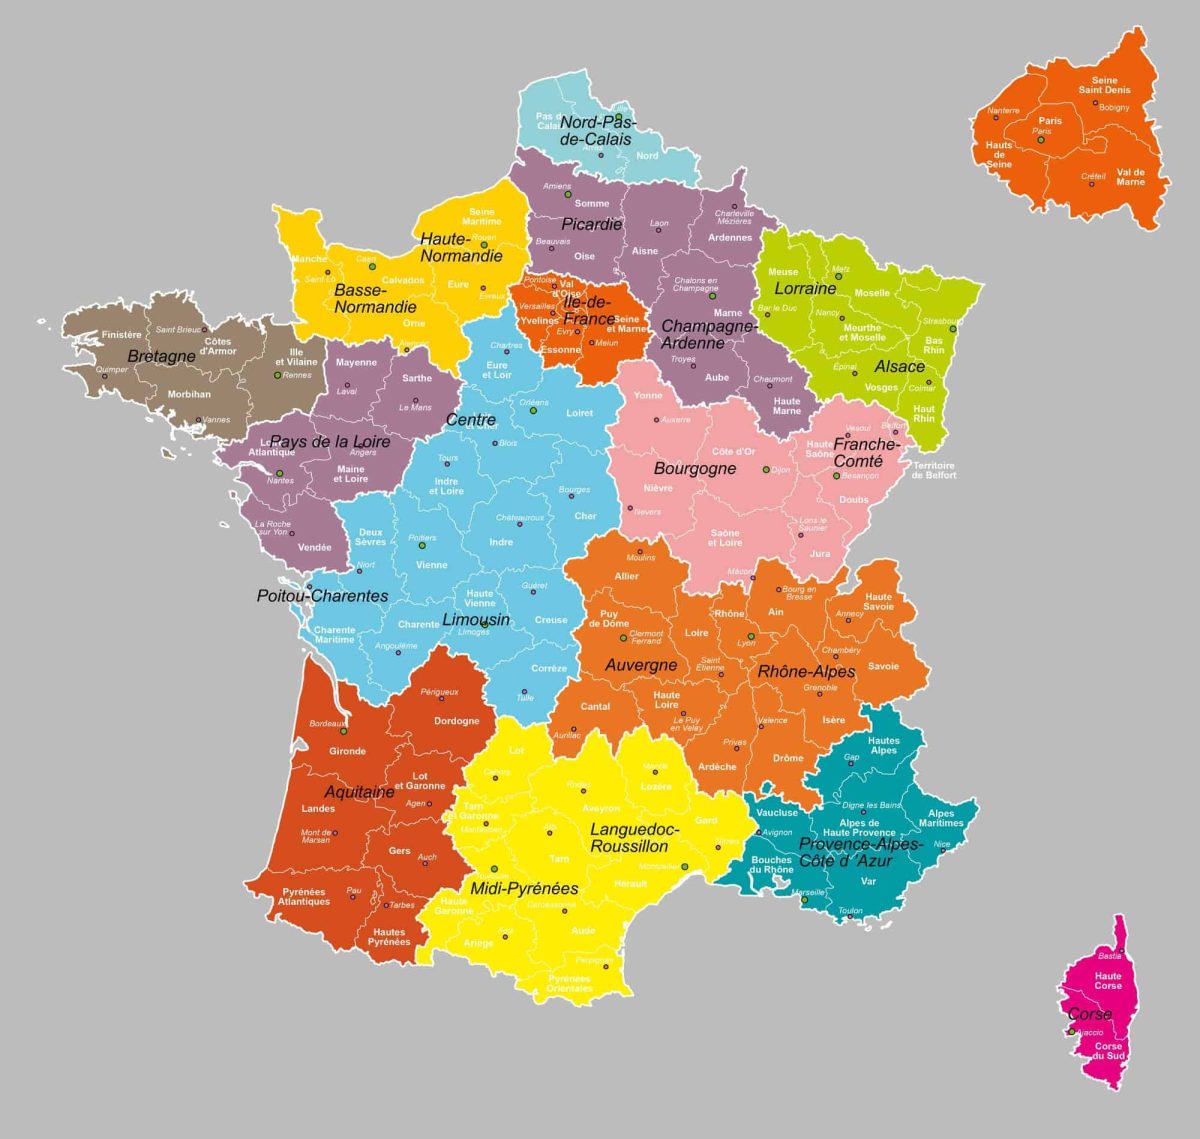 The map of French departments